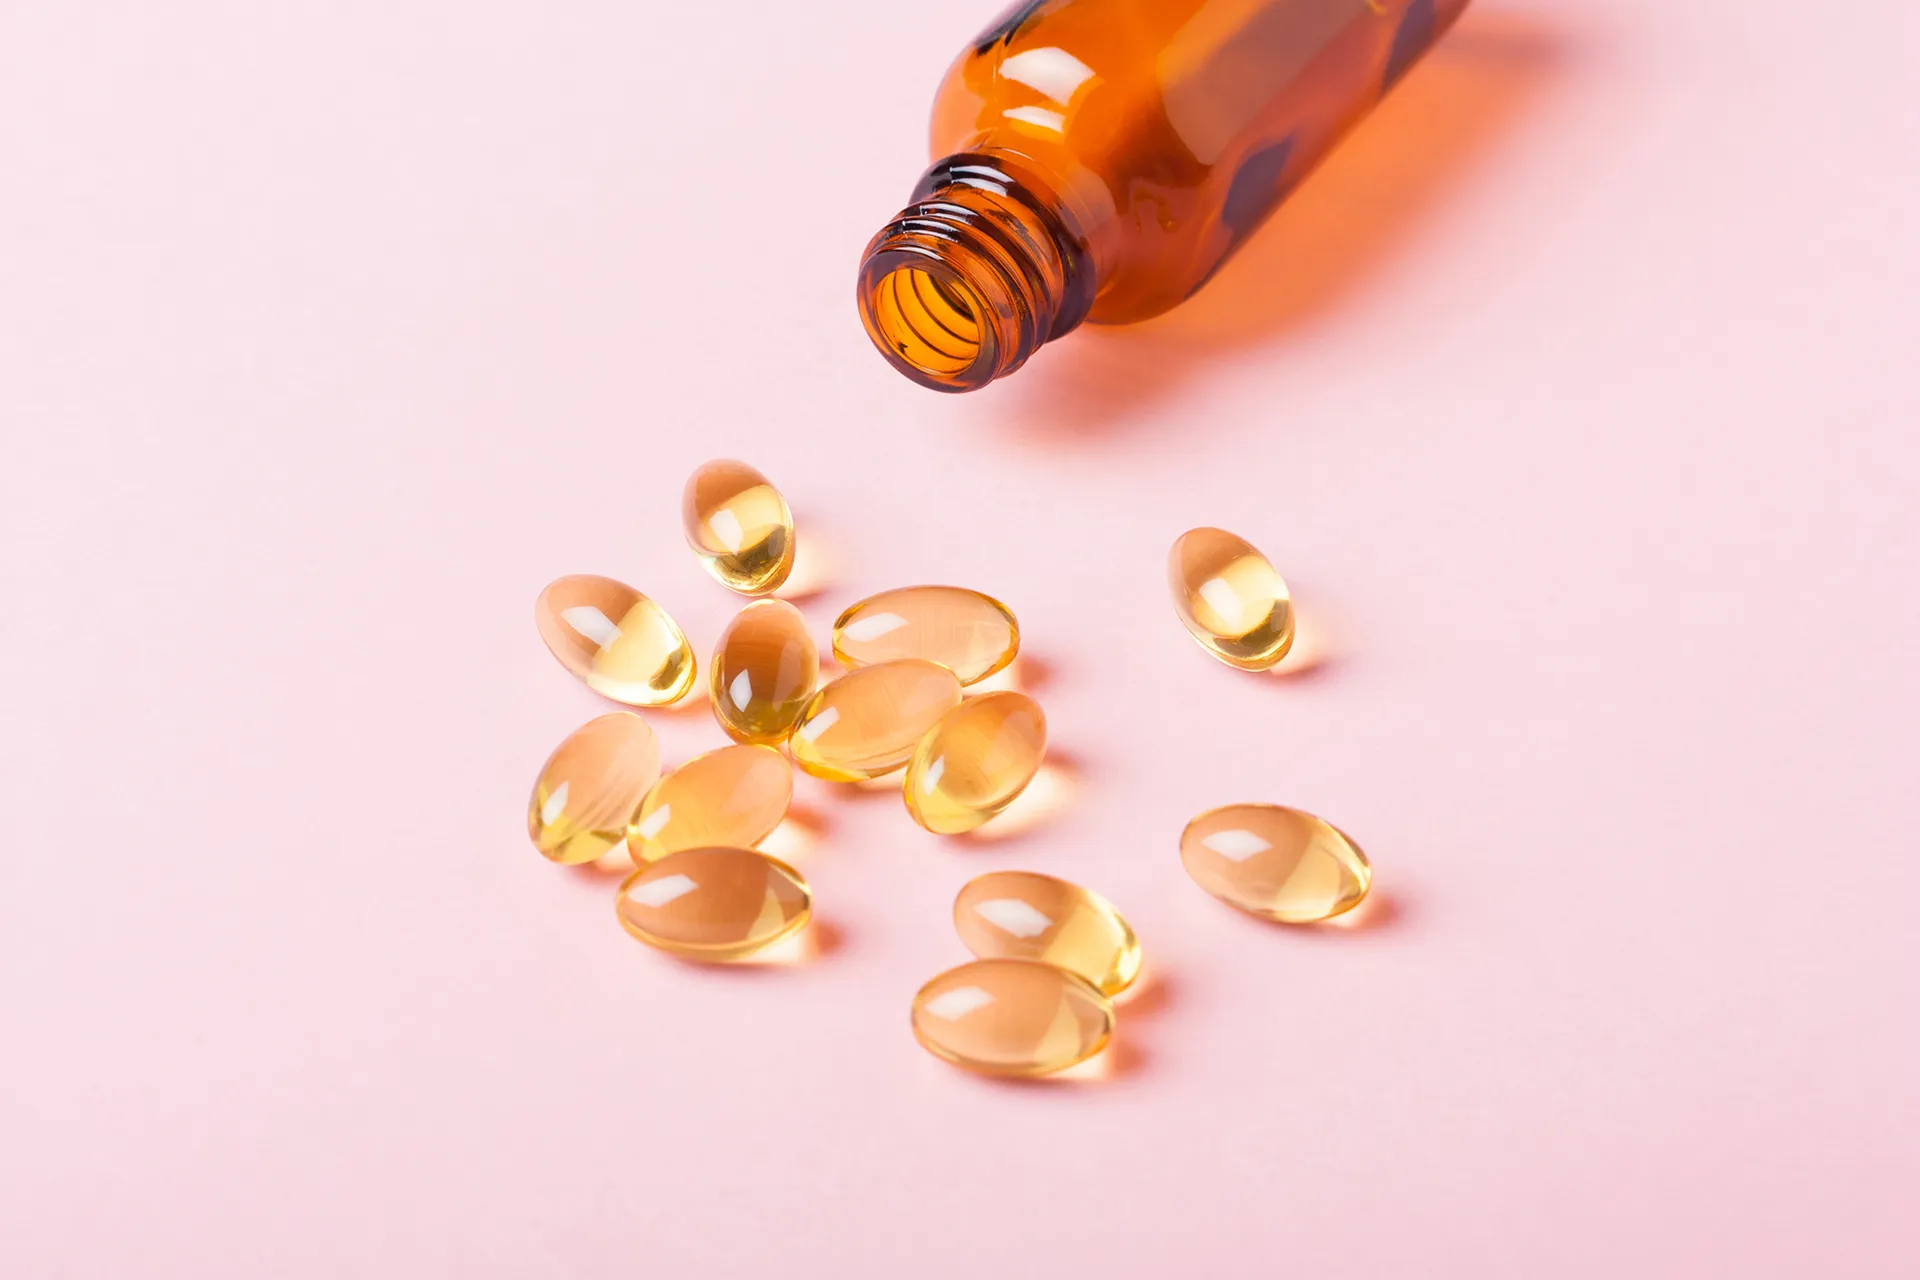 10 Surprising Benefits of Fish Oil for Hair Growth